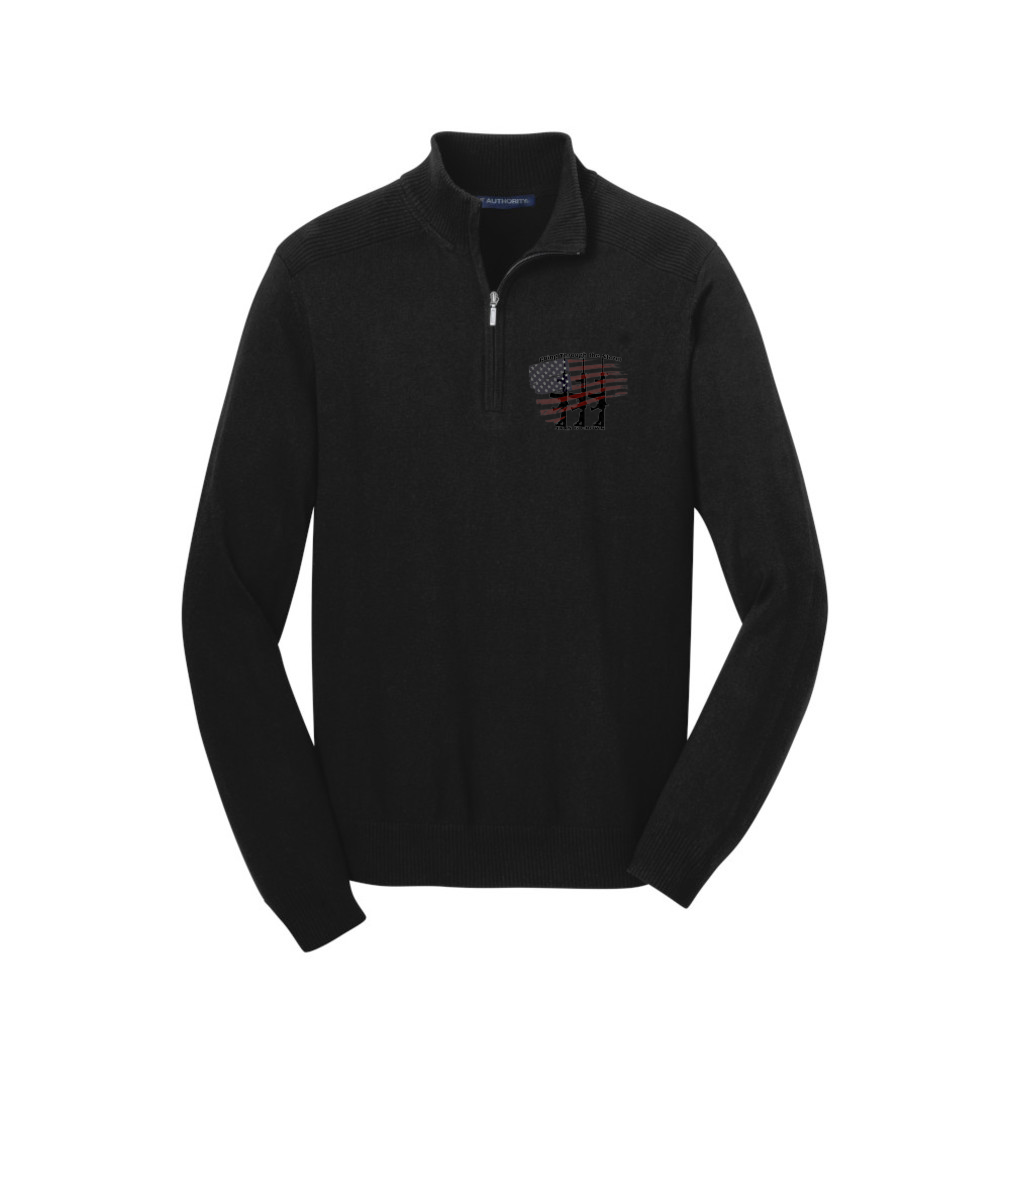 Jaxs & crown gtts Embroidered Port Authority 1/2-Zip Sweater or Similar